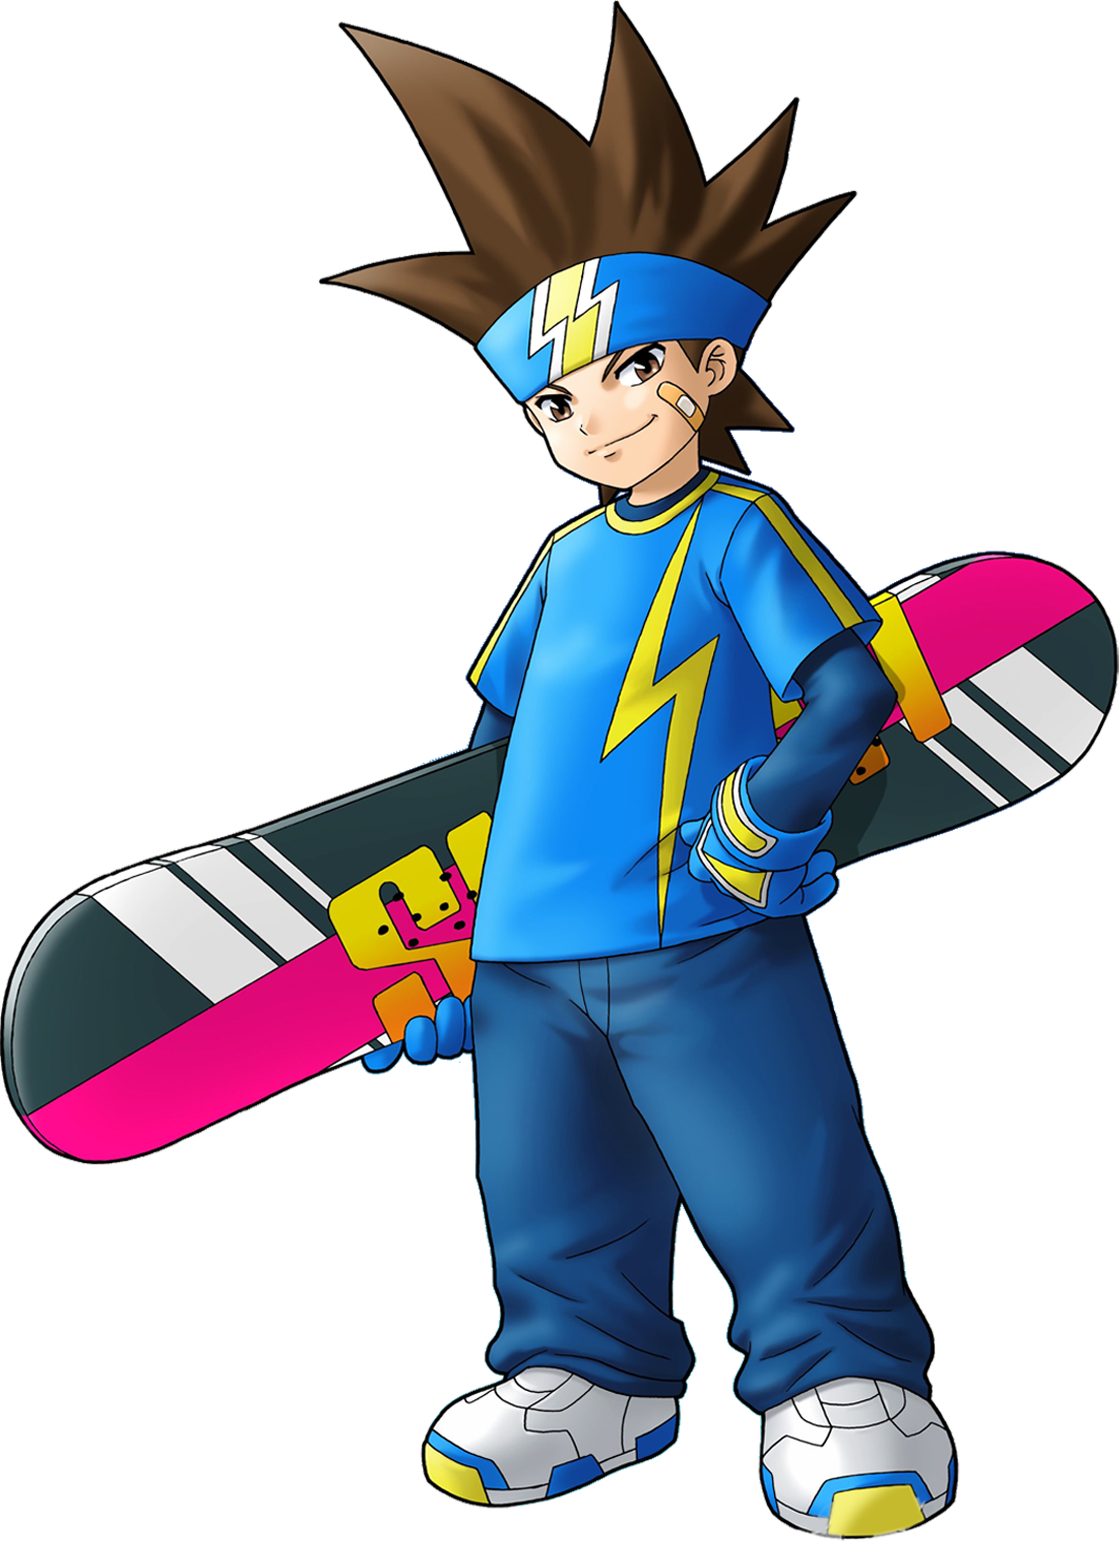 Animated Snowboarder Character PNG